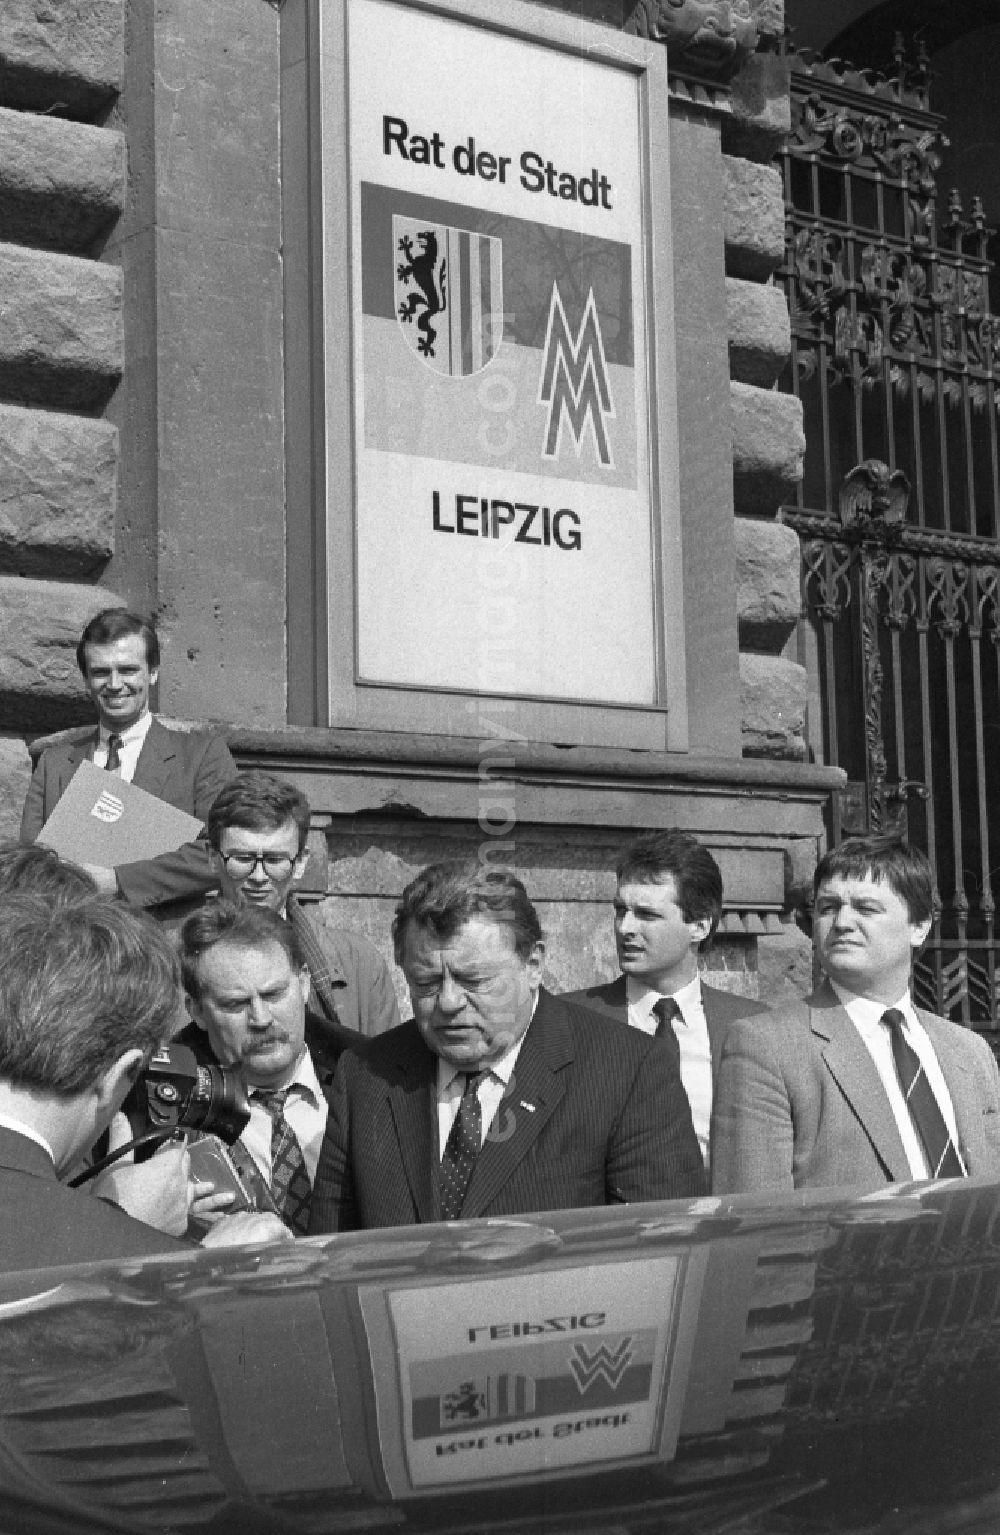 Leipzig: Reception for politicians CSU chairman Franz Josef Strauss in front of the town hall in the district of Mitte in Leipzig in the state of Saxony in the area of the former GDR, German Democratic Republic